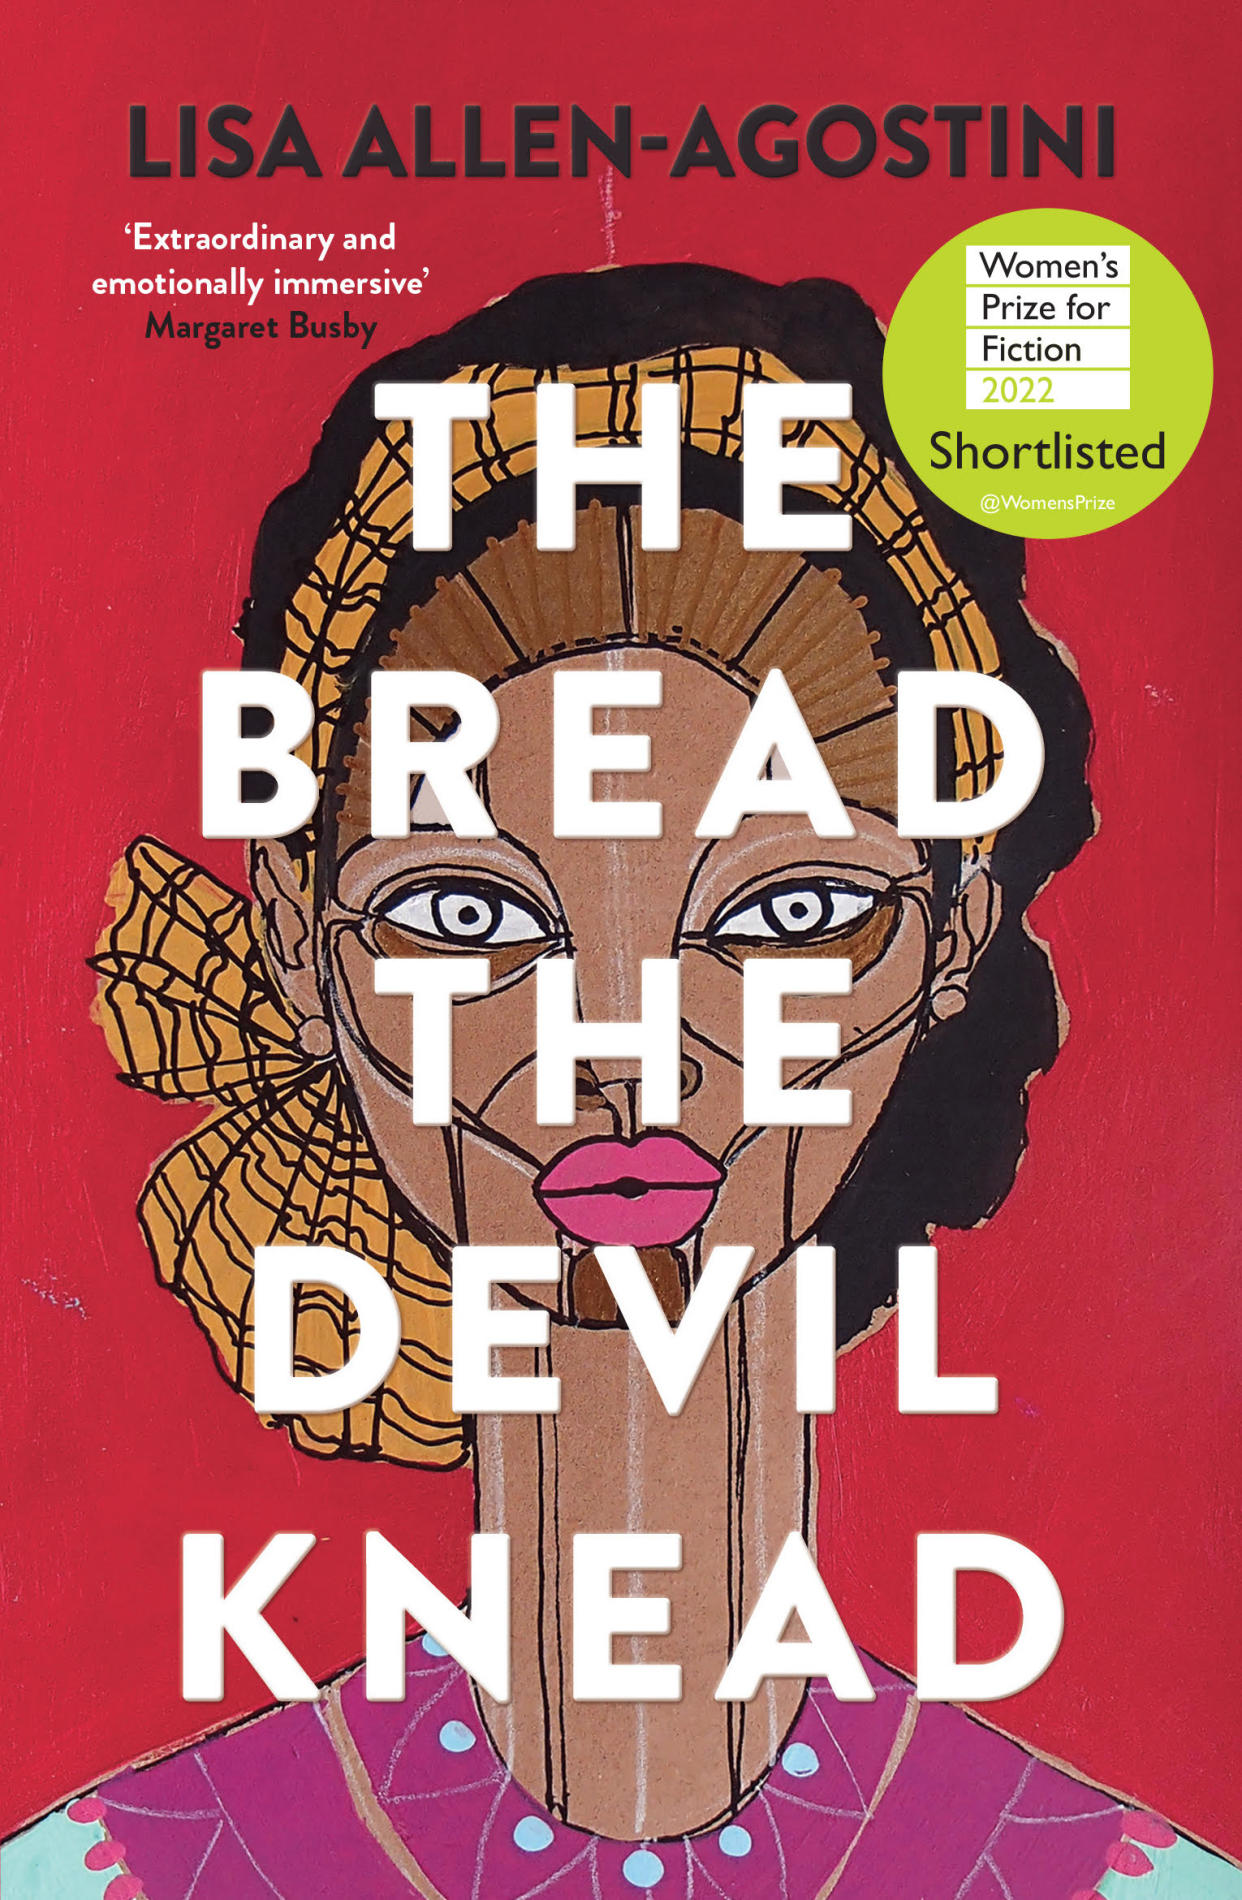 The Bread the Devil Knead by Lisa Allen-Agostini (Women’s Prize for Fiction/PA)